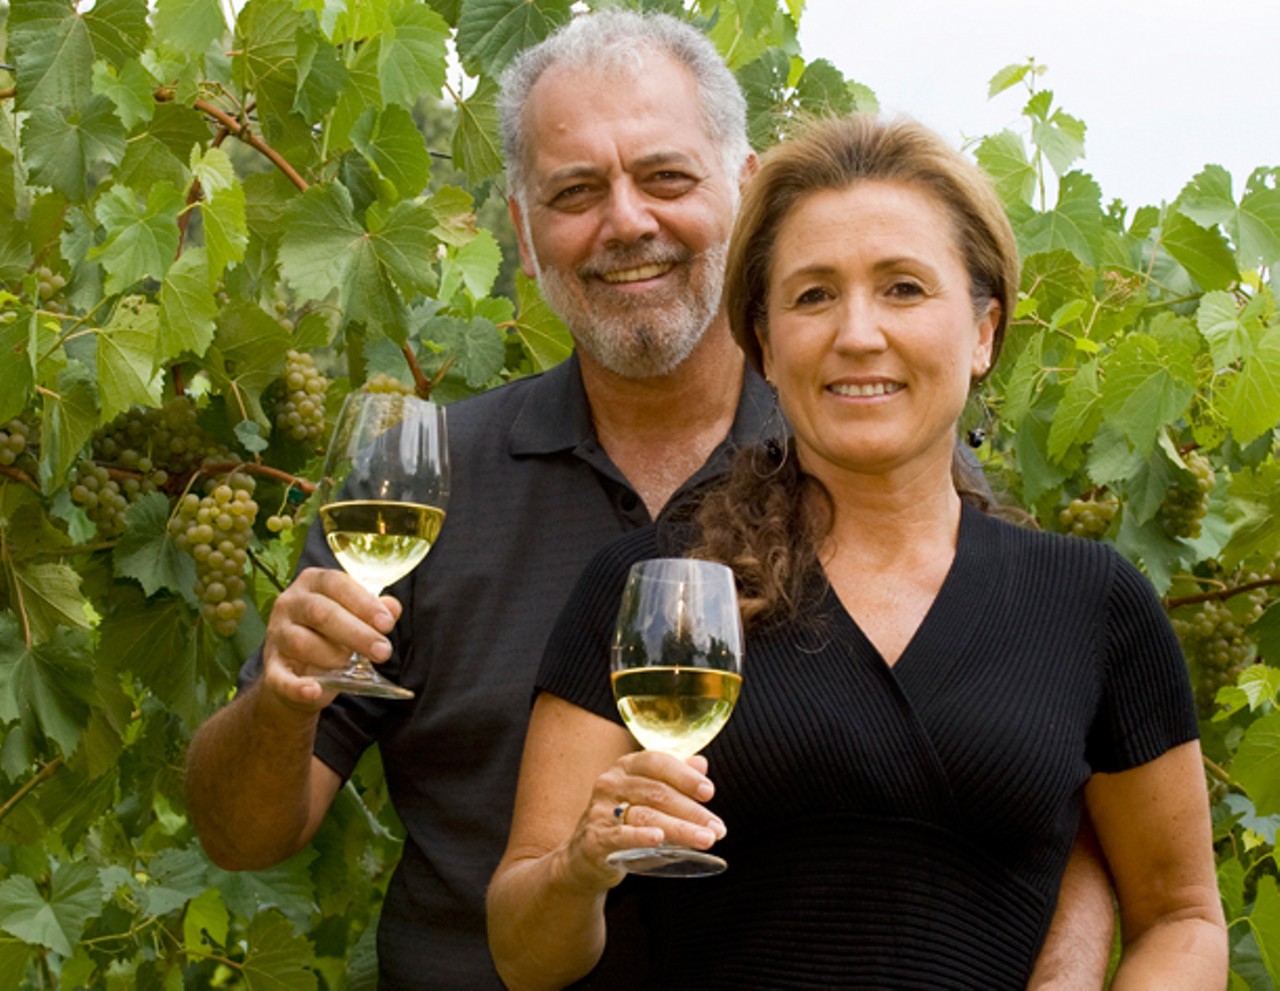 Augusta Winery was founded in 1988 by Tony Kooyumjian. Fun fact: he actually started his career in aviation and didn't become interested in grape growing until after sampling fine wines in the countries he visited as a pilot. Today he and his wife, Cindy, own both Augusta Winery and Montelle Winery. Photo courtesy of Augusta Winery.